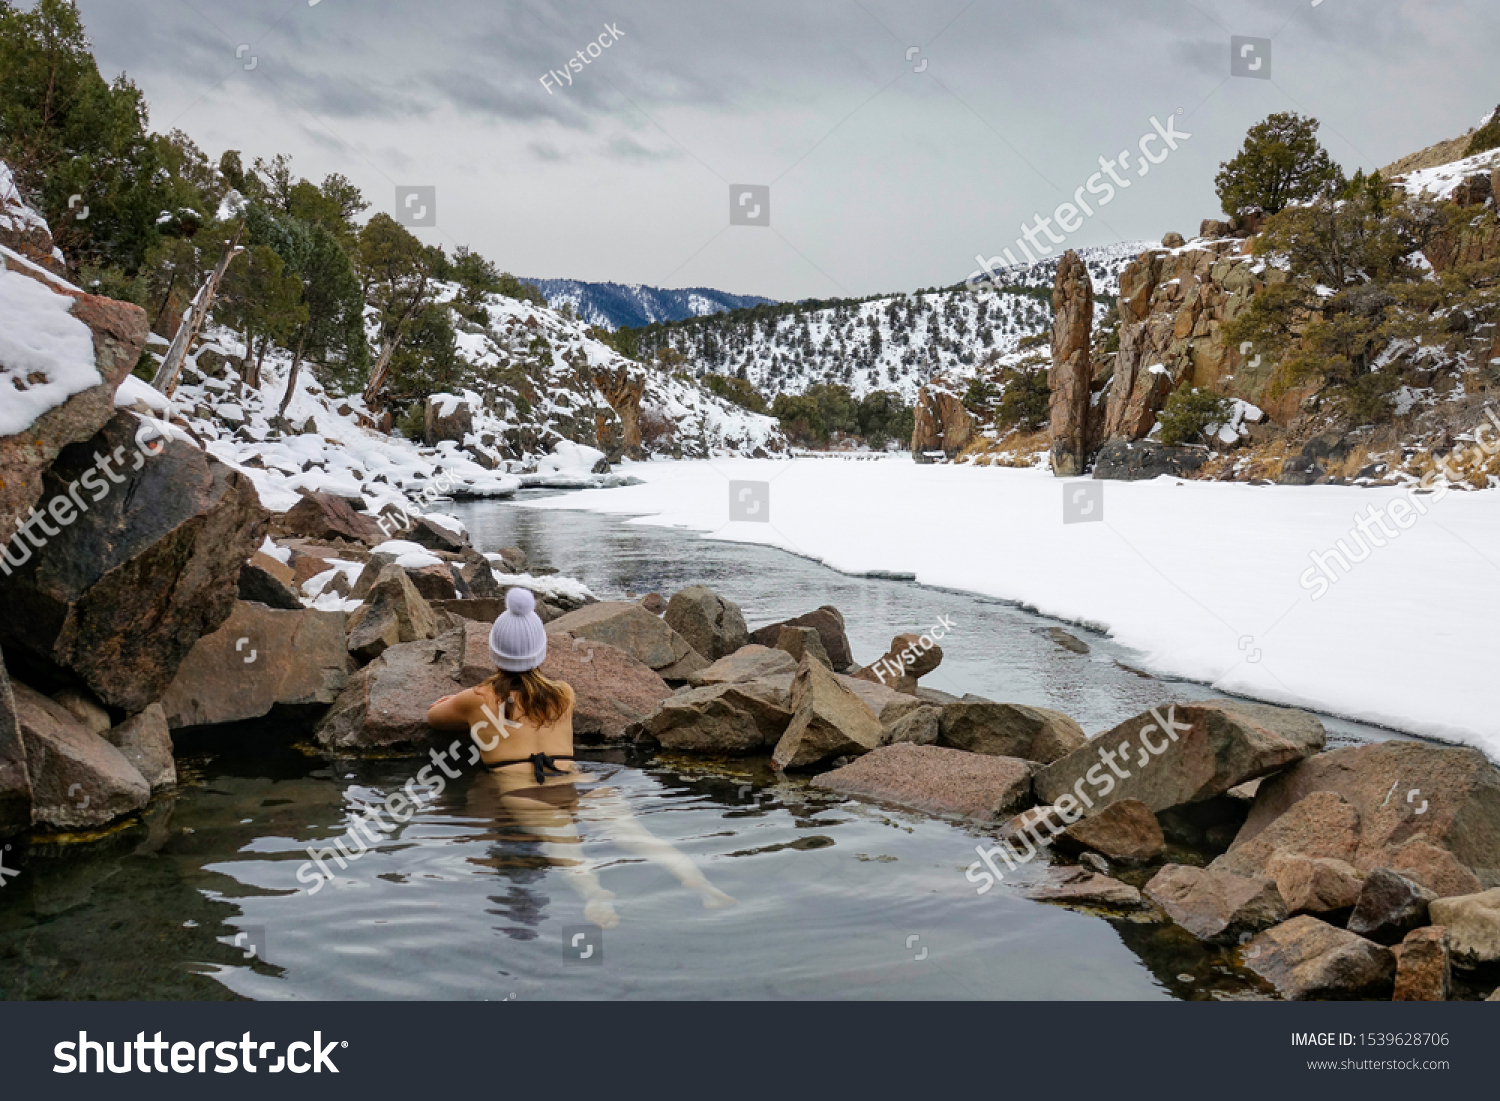 CLOSE UP: Young woman hiking in Colorado relaxes in the Radium Hot springs. Girl in a black bikini and white winter cap lies in the therapeutic water of ahot pond and observes the snowy nature. #1539628706